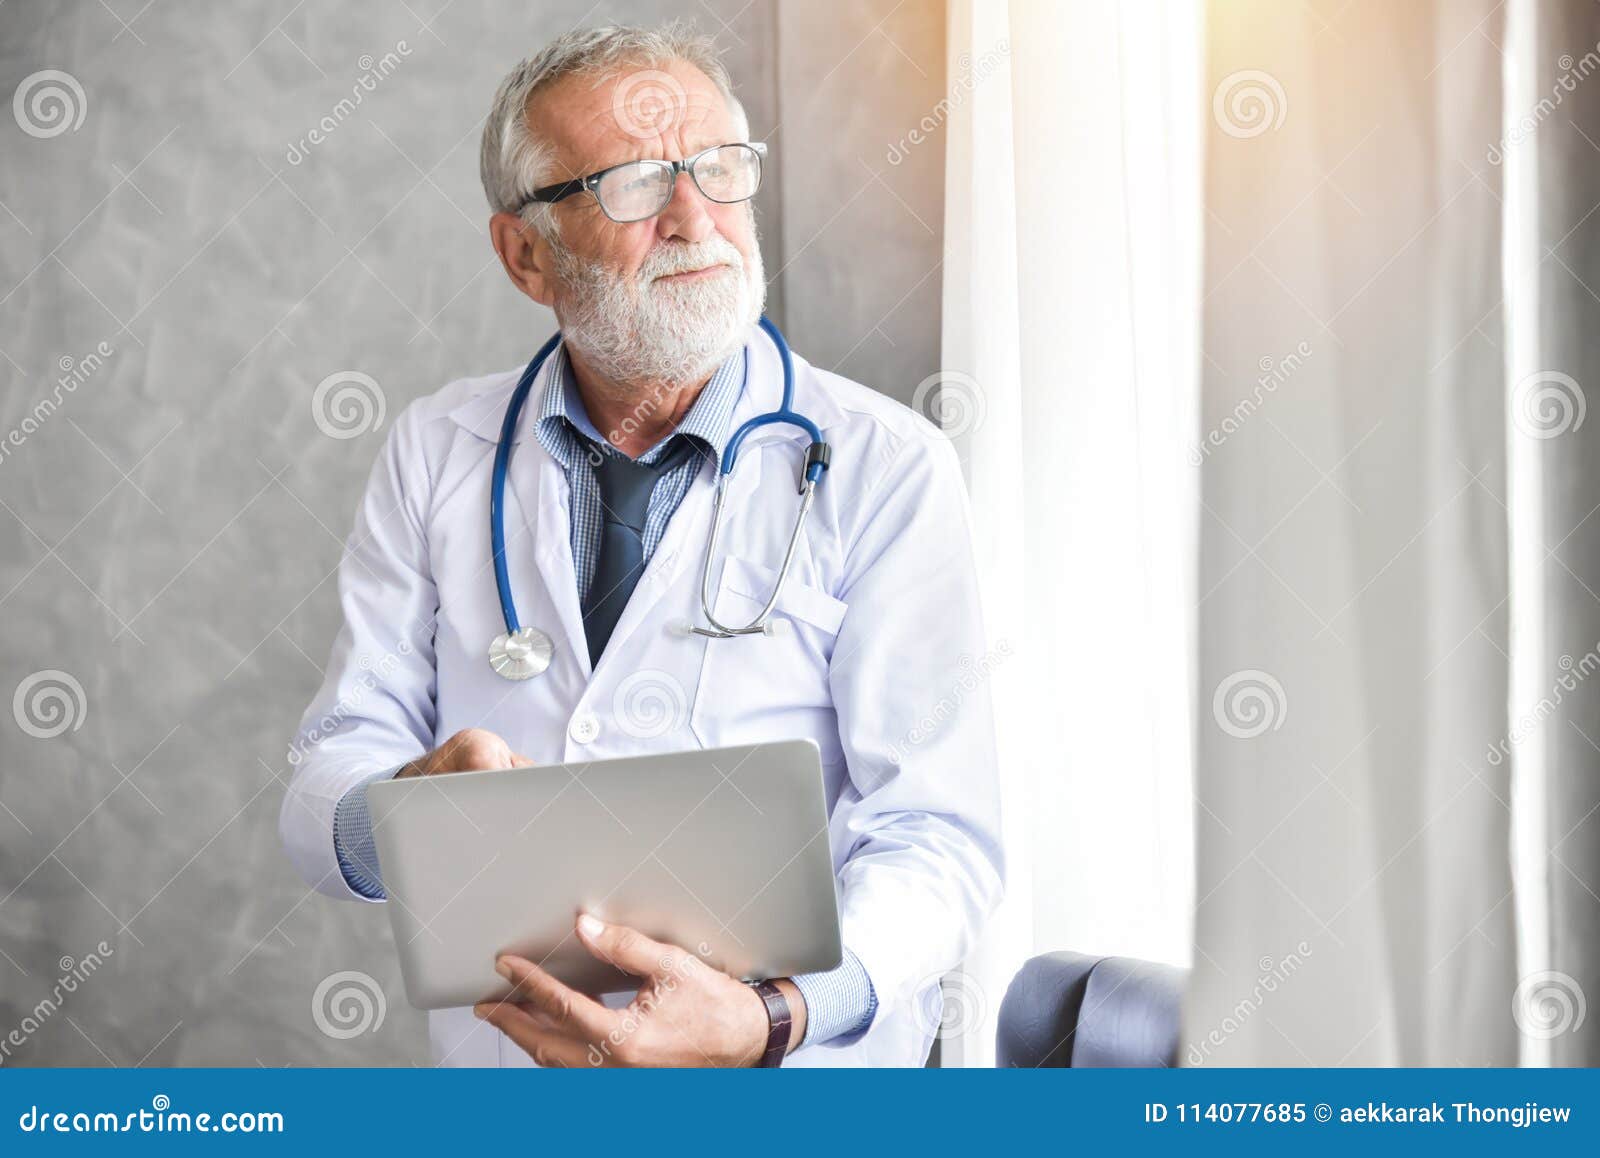 Senior Male Doctor is Using Laptop Computer. Stock Image - Image of ...